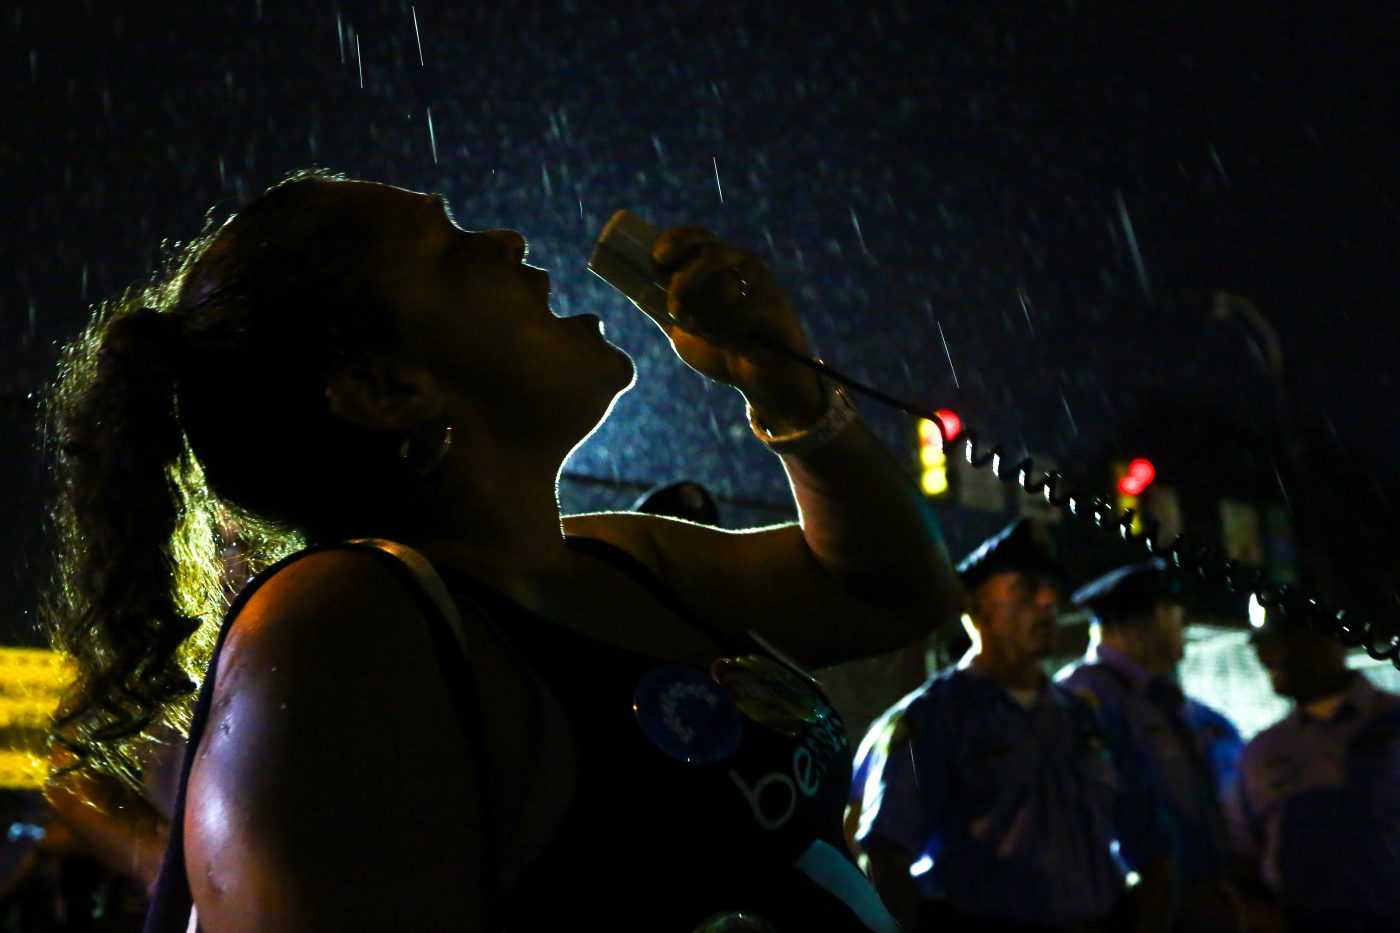 Priscila Ortiz, of Dallas, Texas, shouts into a megaphone "We wont vote for Hillary" outside the 2016 Democratic National Convention in Philadelphia, July 28.